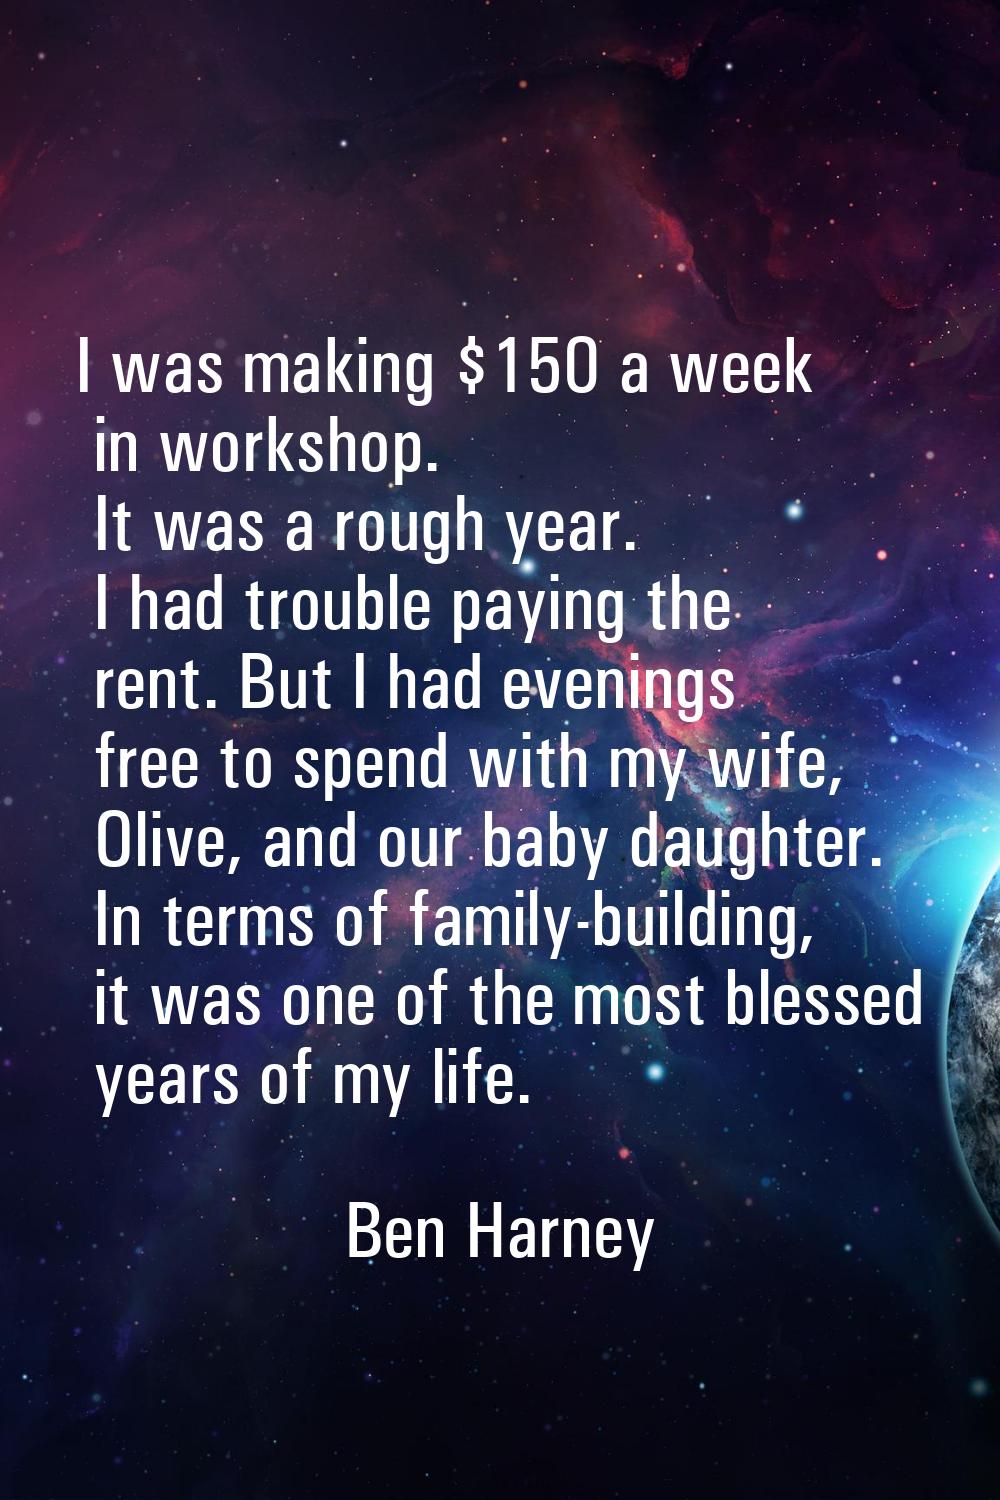 I was making $150 a week in workshop. It was a rough year. I had trouble paying the rent. But I had